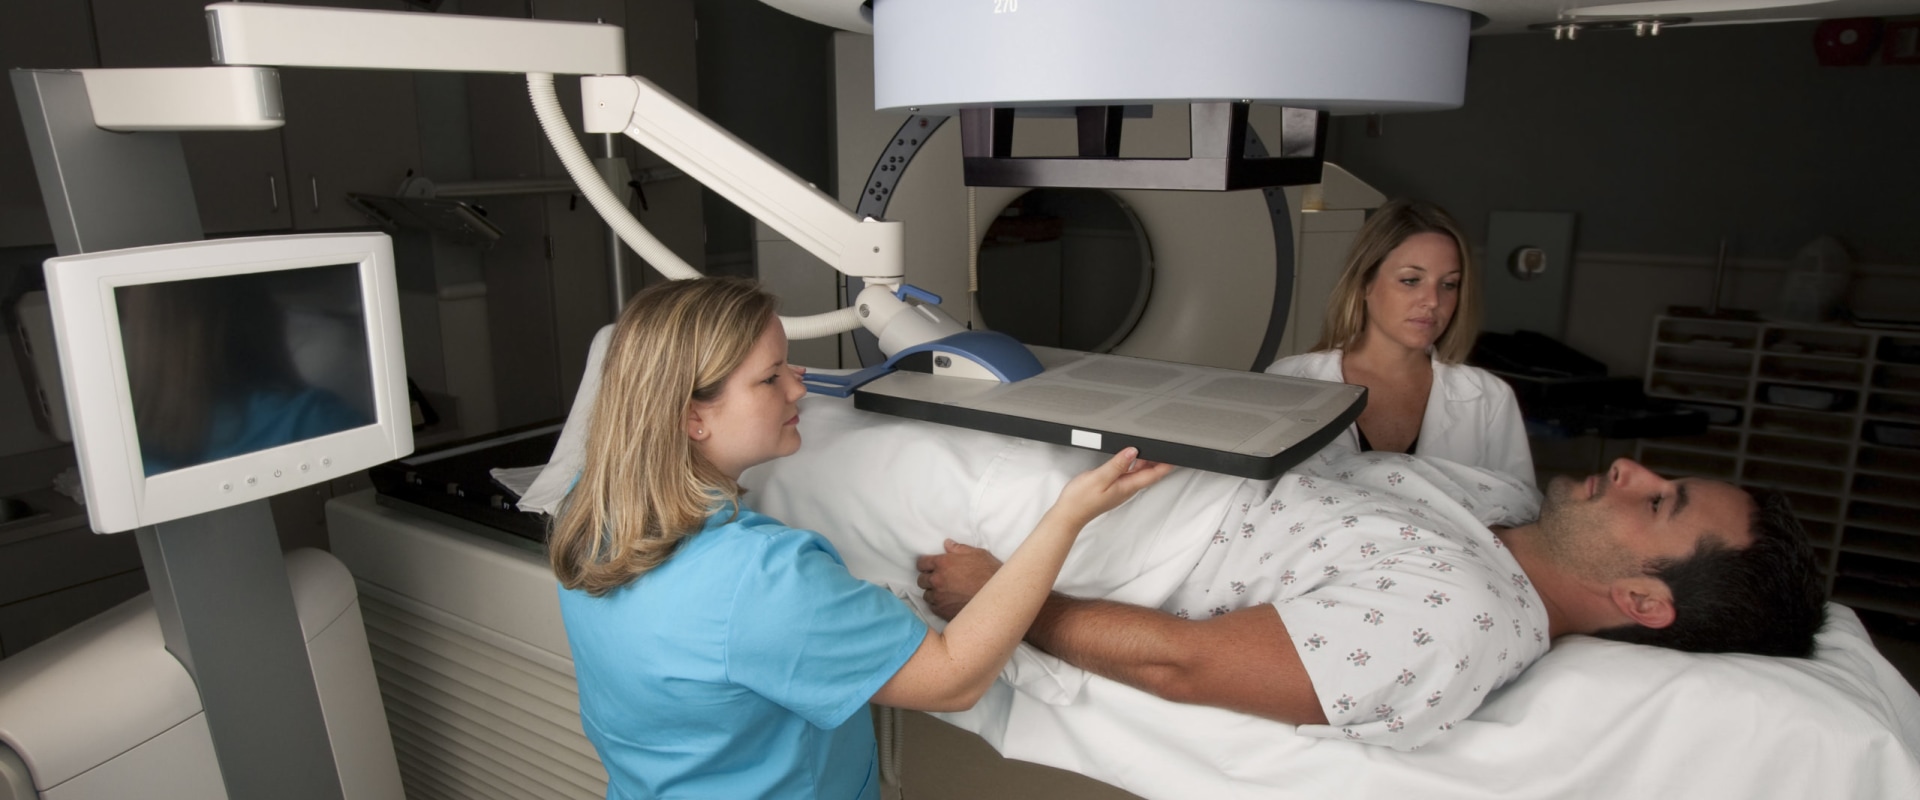 How common is secondary cancer after radiation?